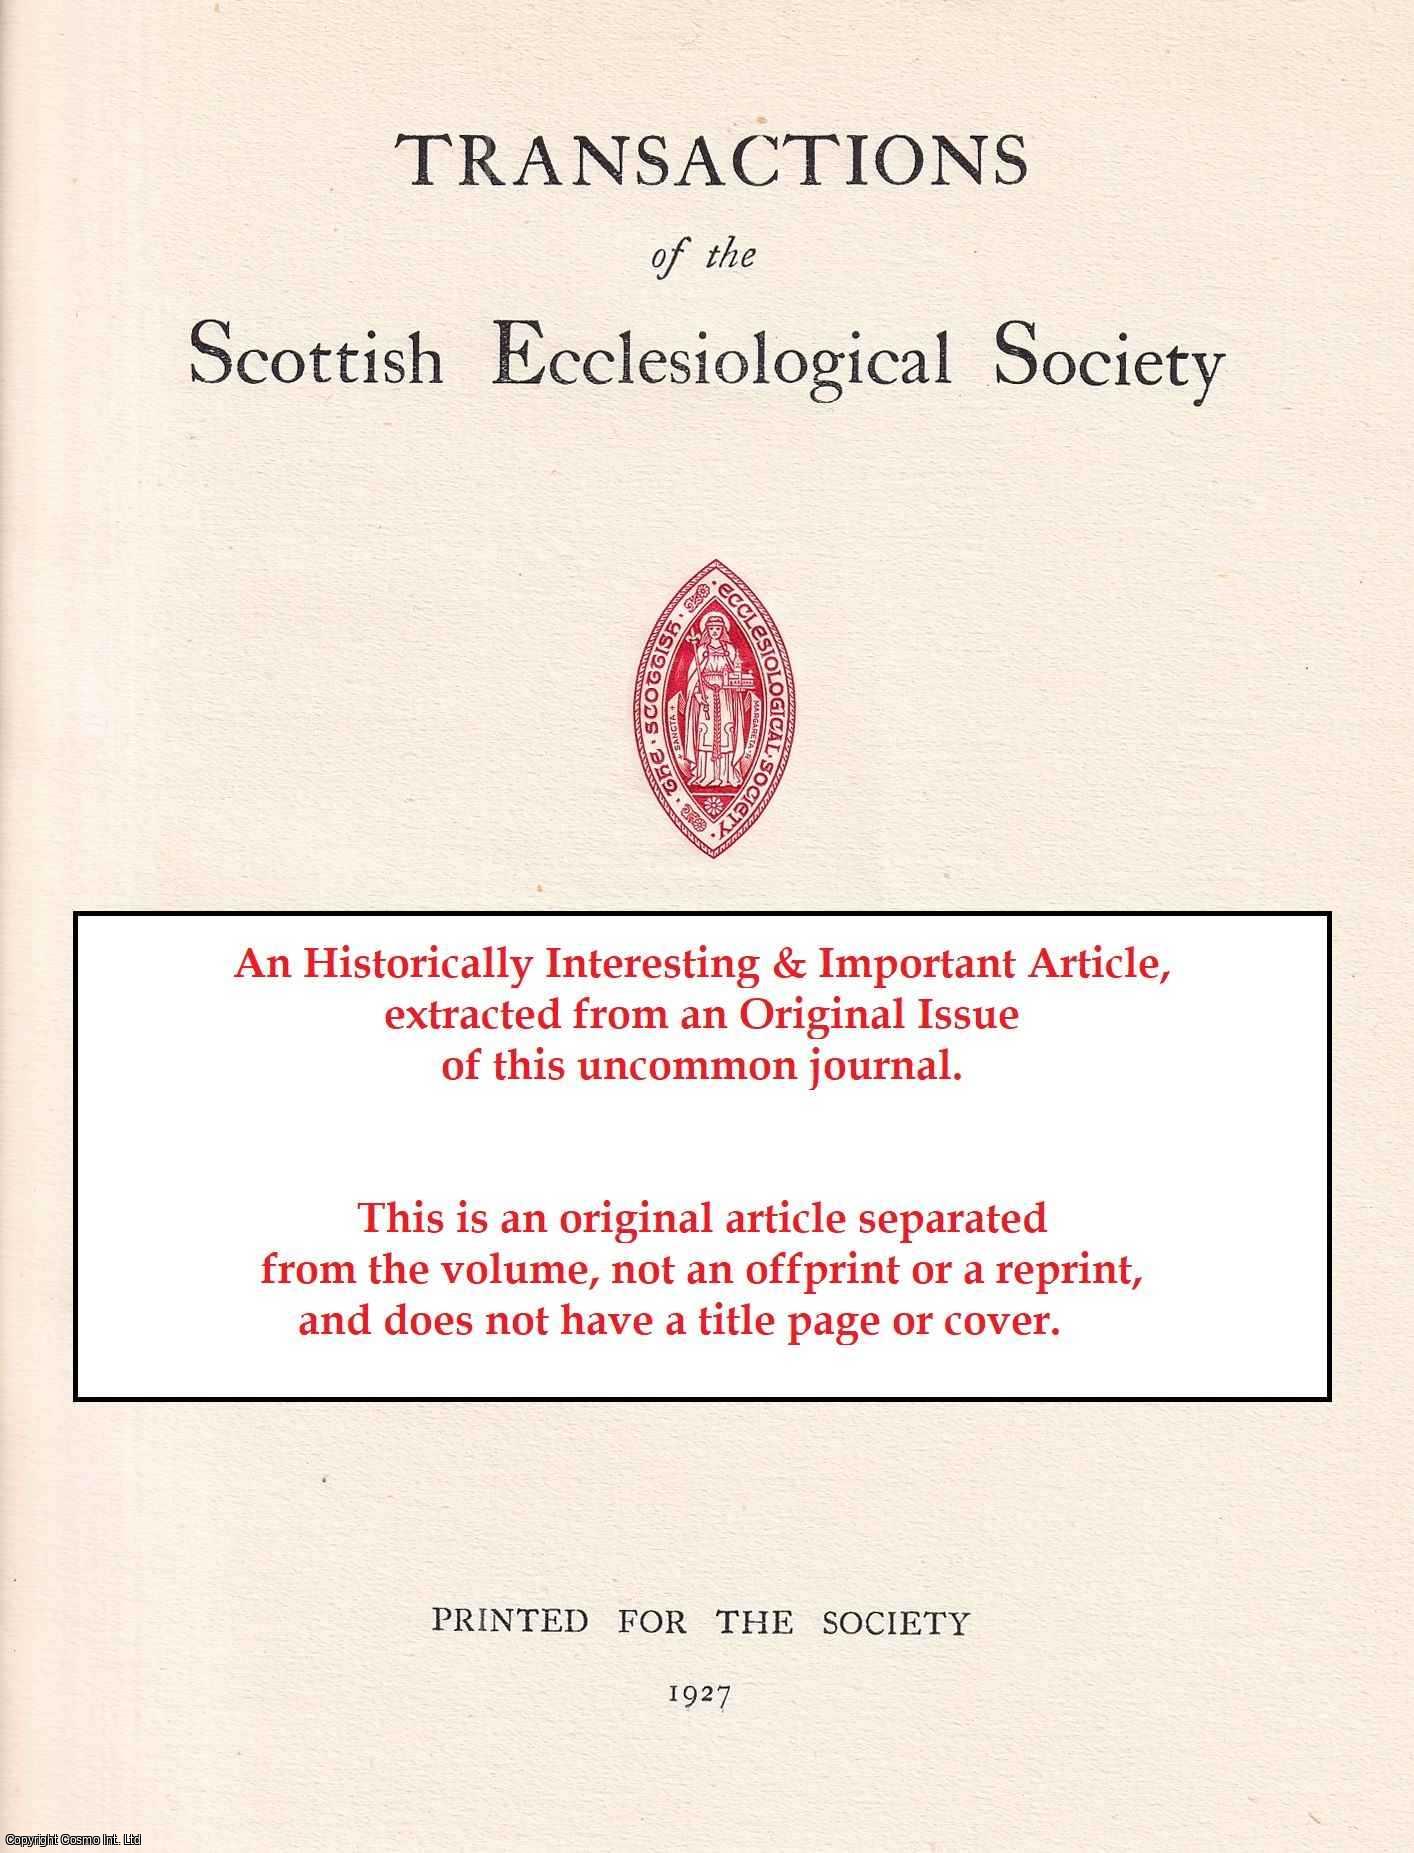 Rev Kirkwood Hewat - John Willock, Superintendent of the West: Preacher of the Reformed Religion in Scotland. An original article from the Transactions of the Scottish Ecclesiological Society, 1913.